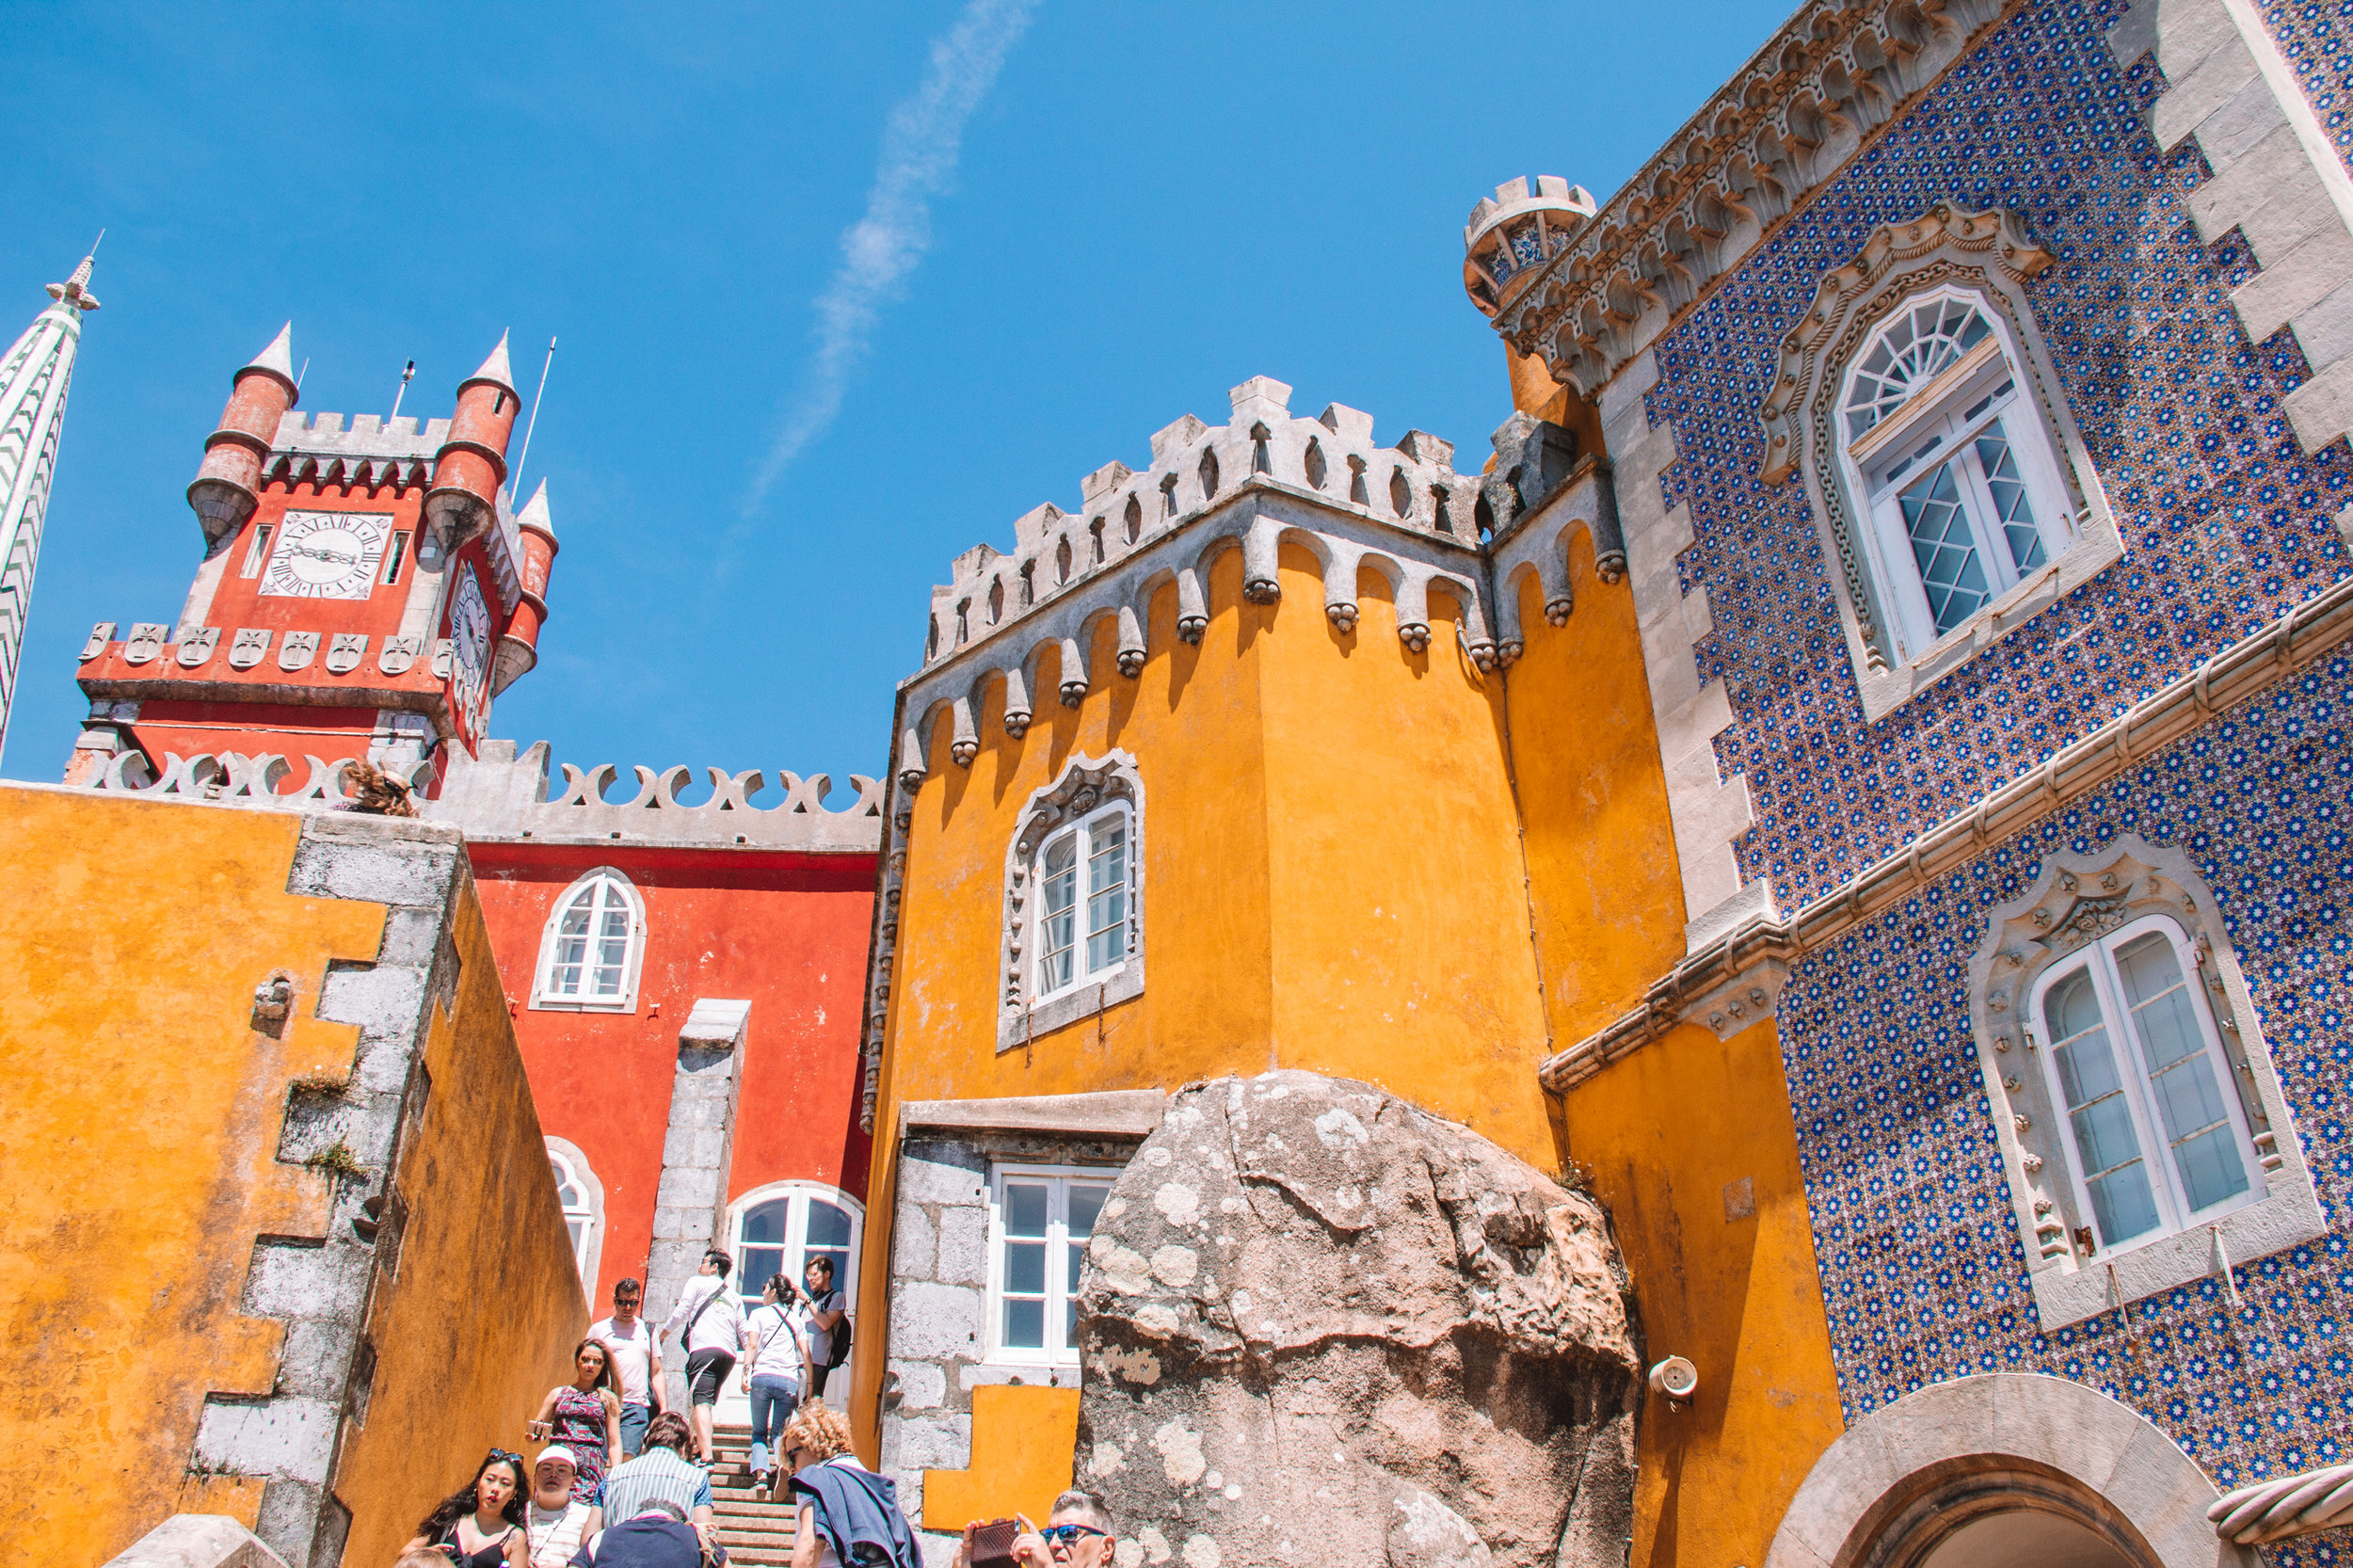 The primary colored palace walls of Pena Palace in Sintra